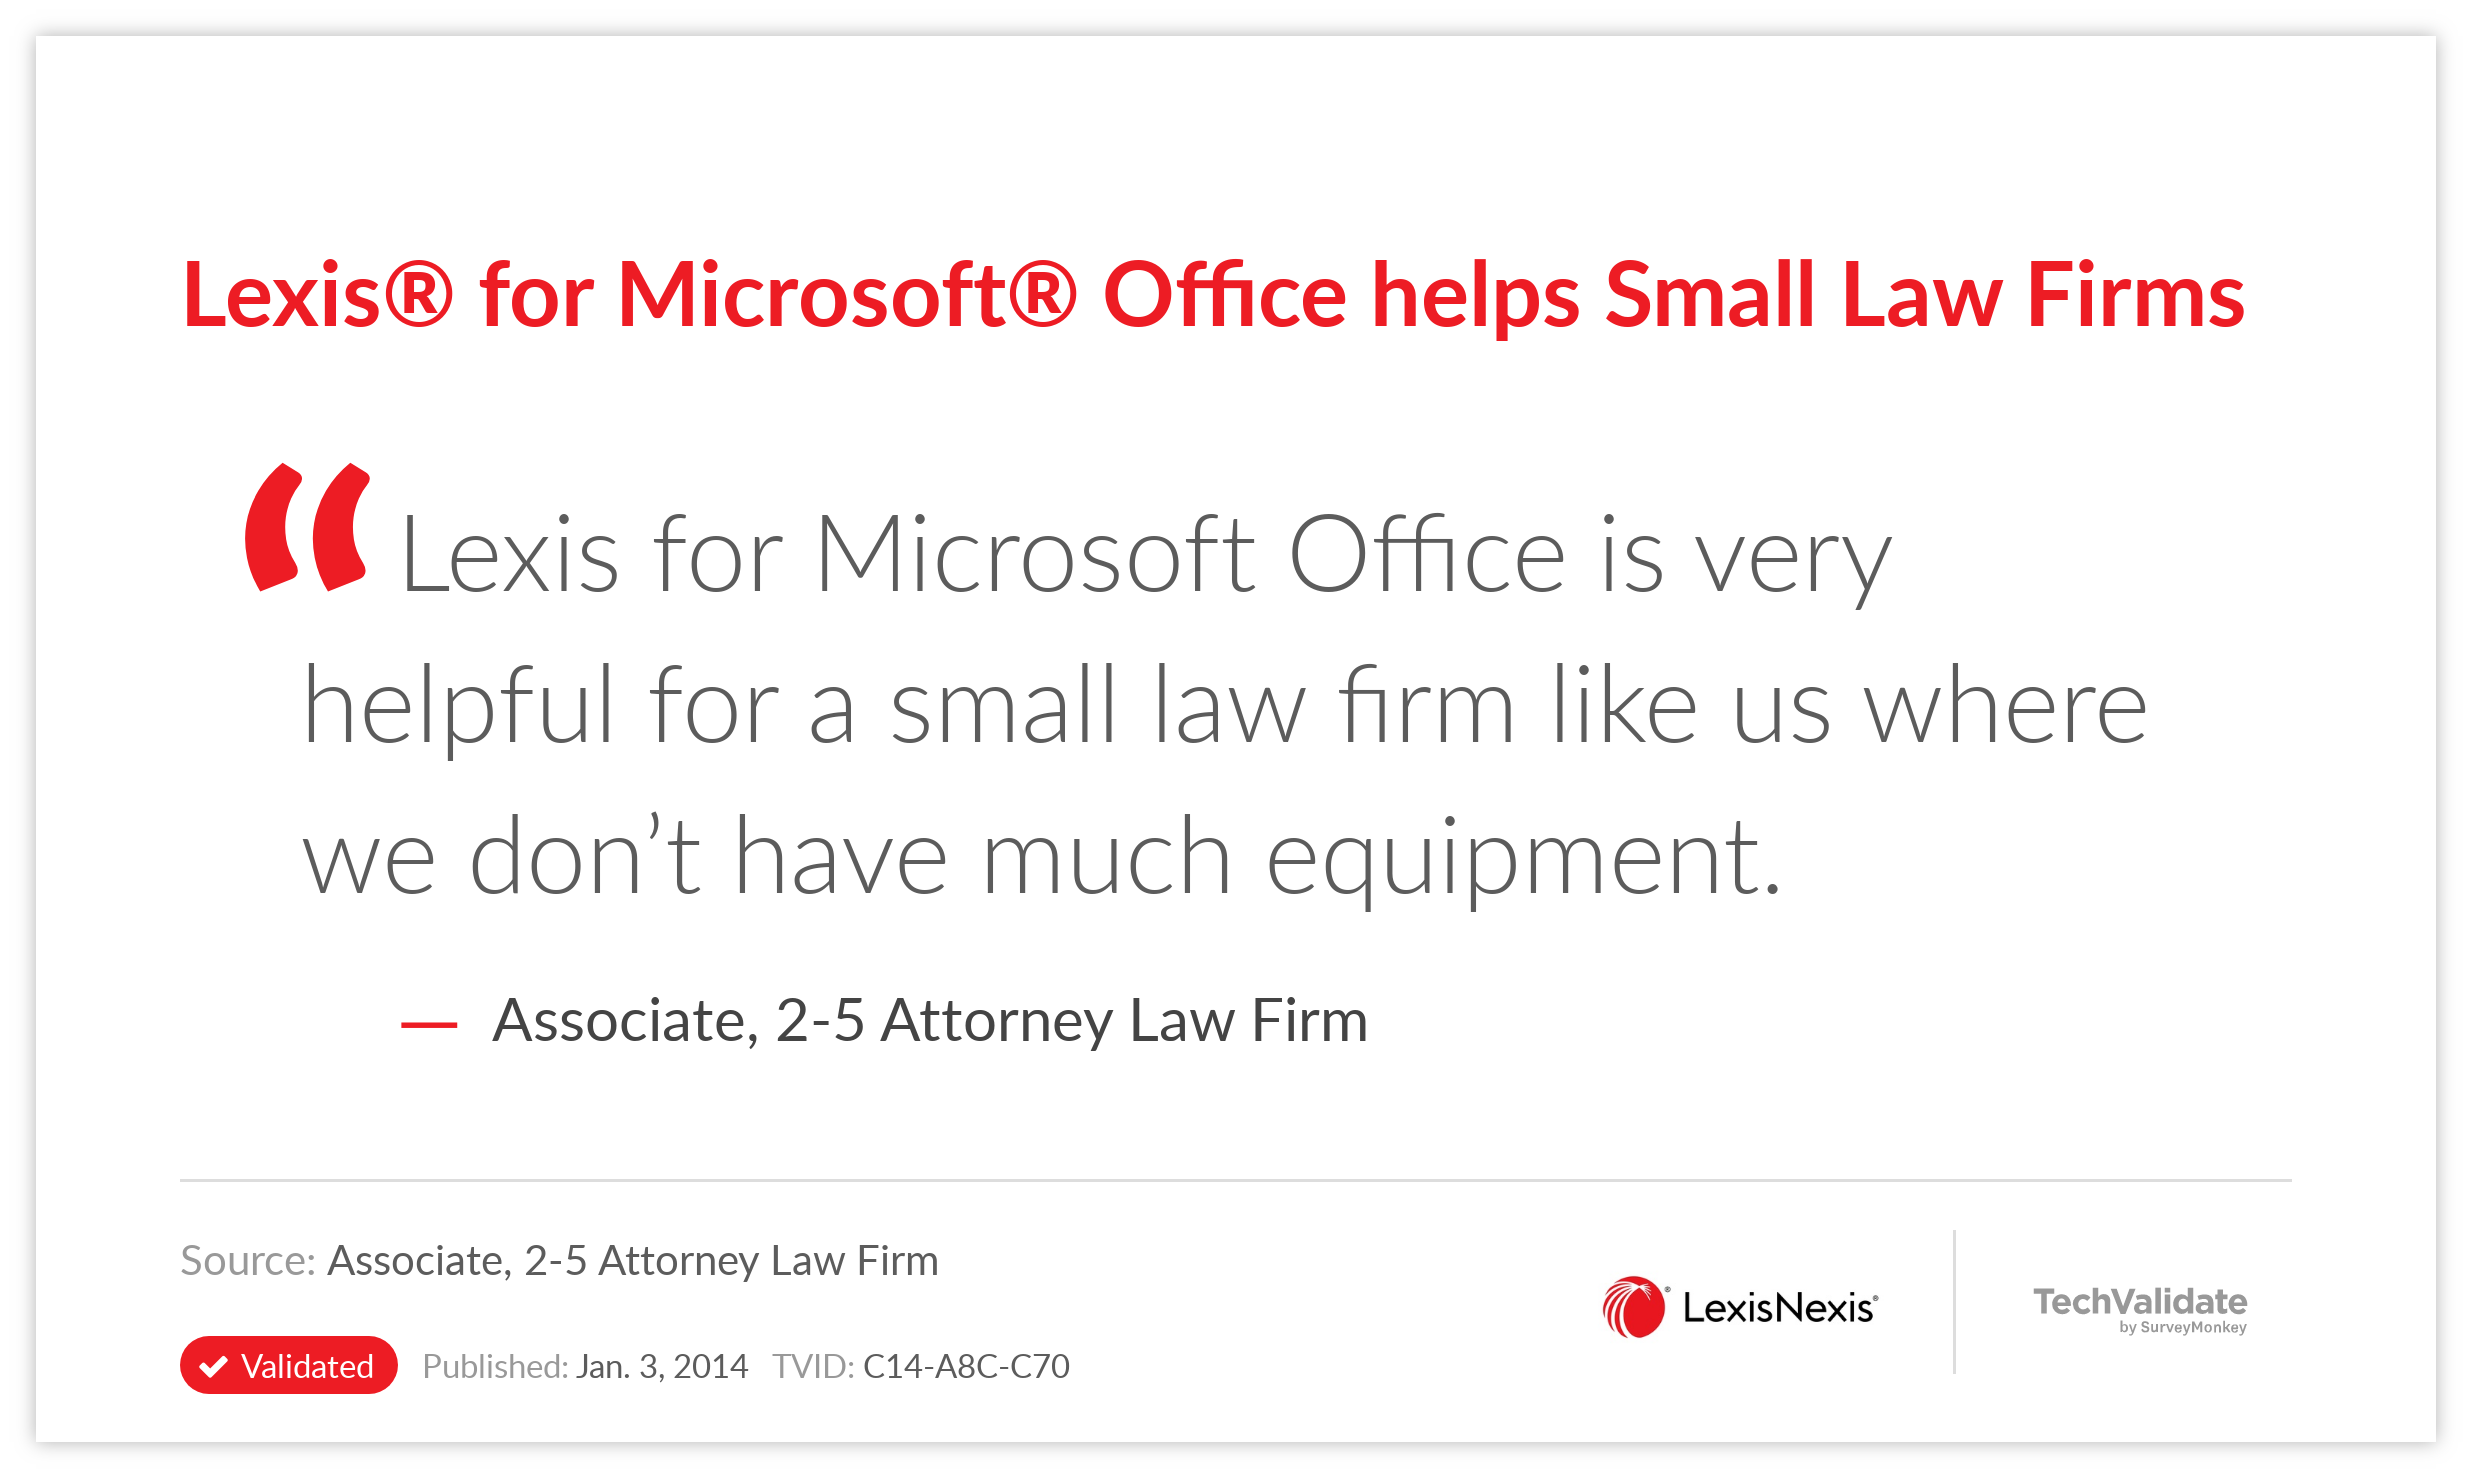 Lexis® for Microsoft® Office helps Small Law Firms